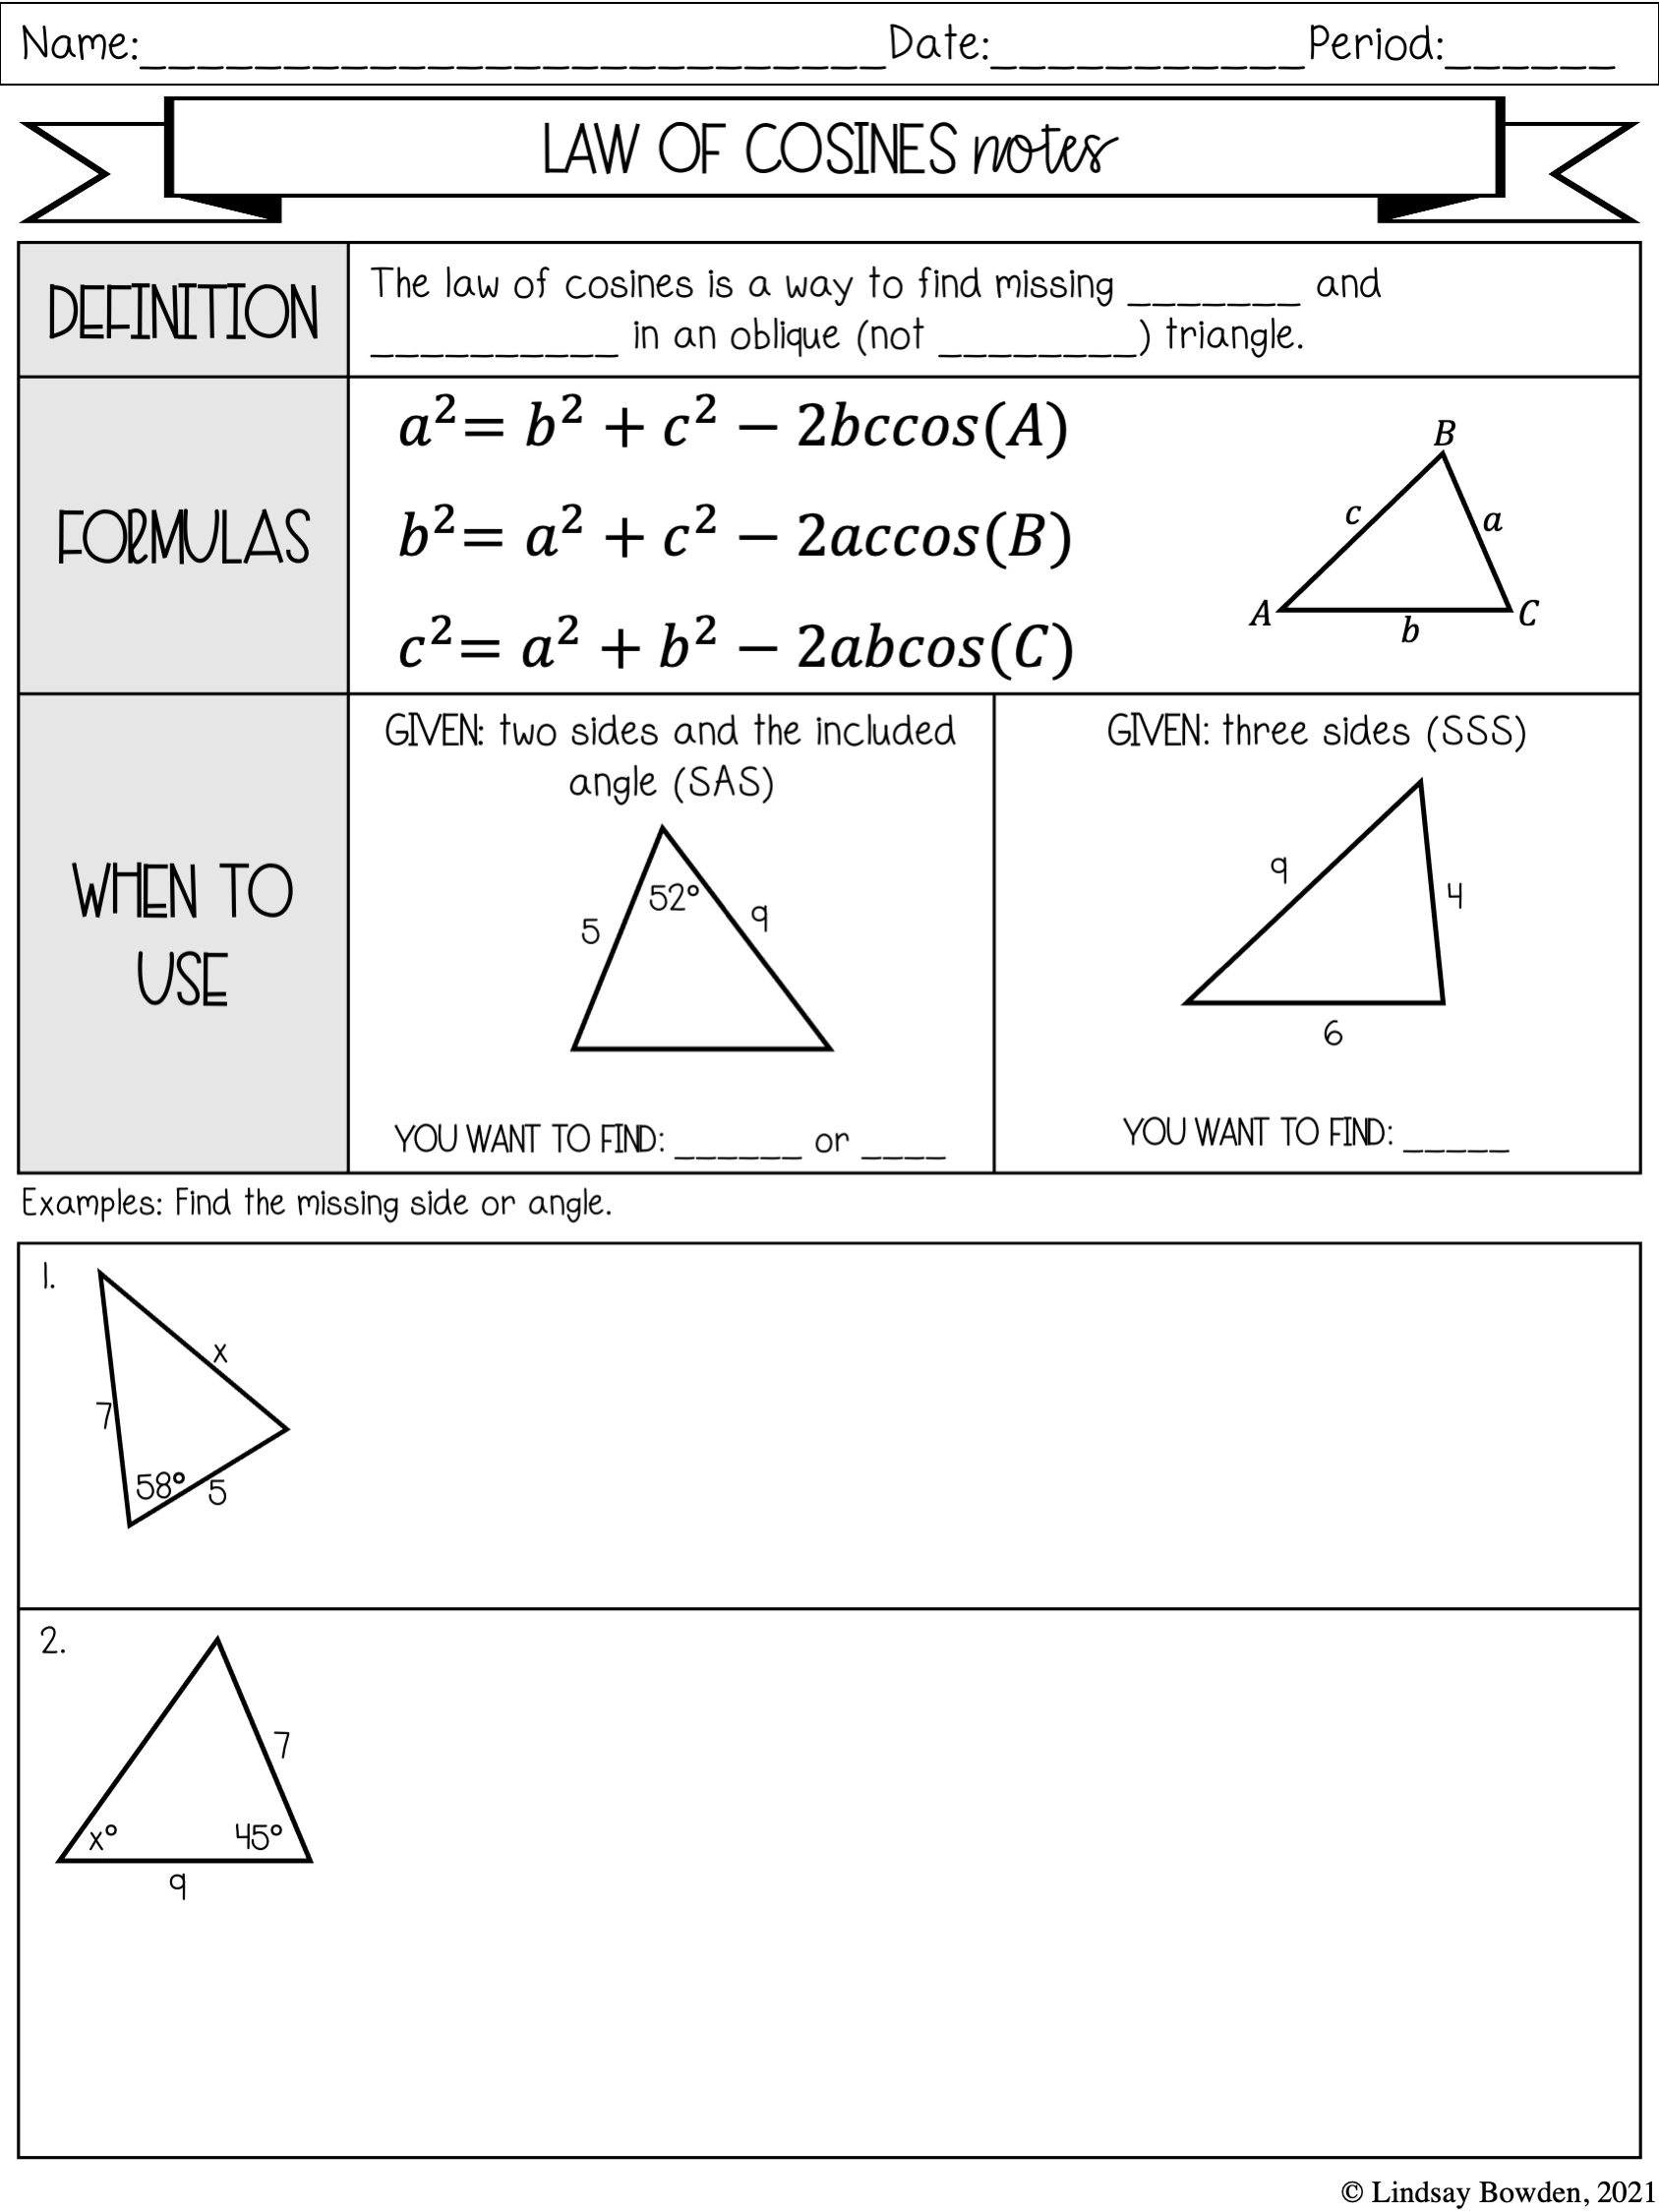 Law of Sines and Cosines Notes and Worksheets - Lindsay Bowden Throughout Law Of Cosines Worksheet